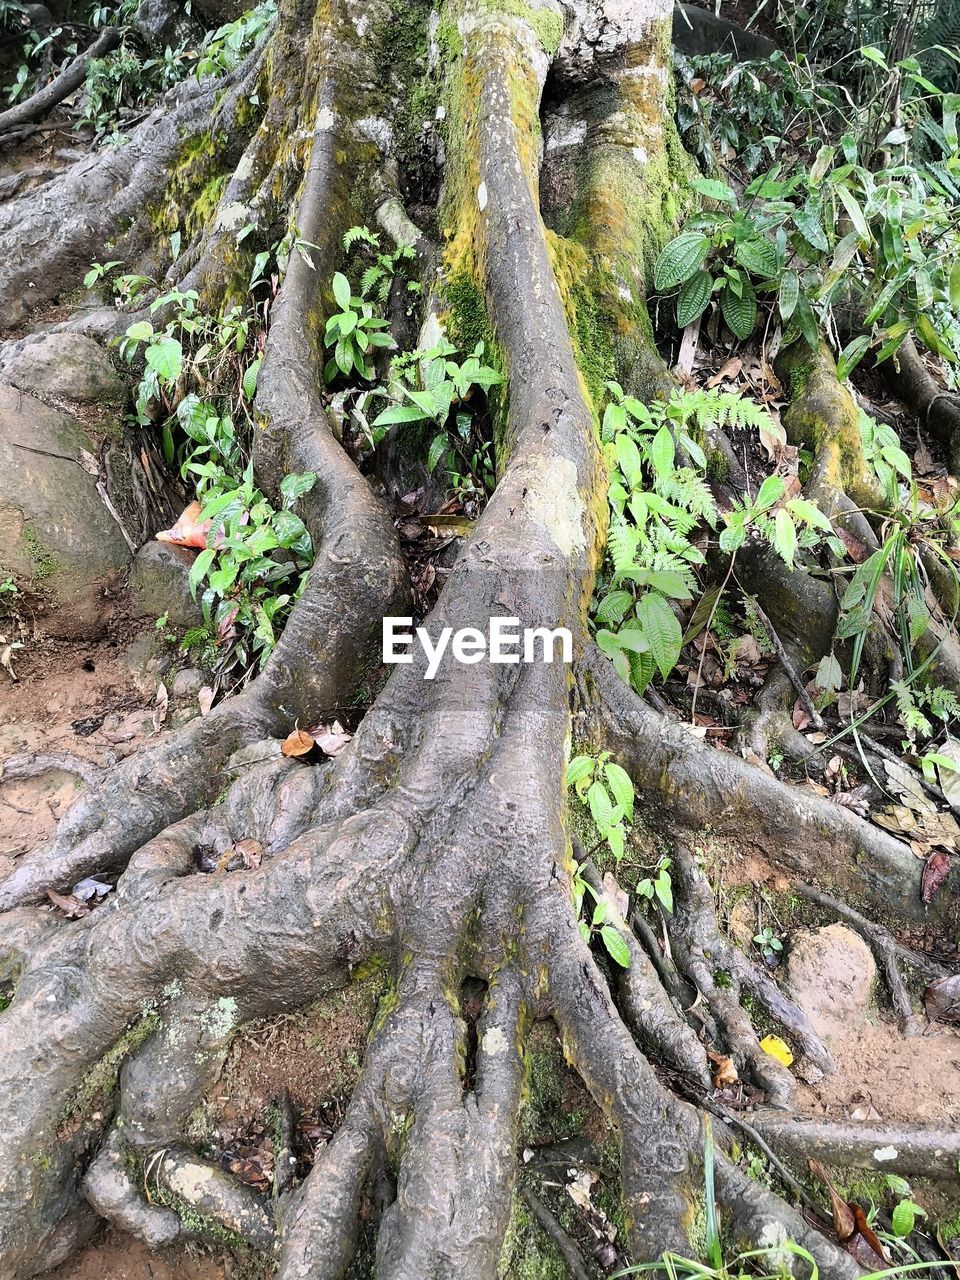 CLOSE-UP OF TREE ROOTS